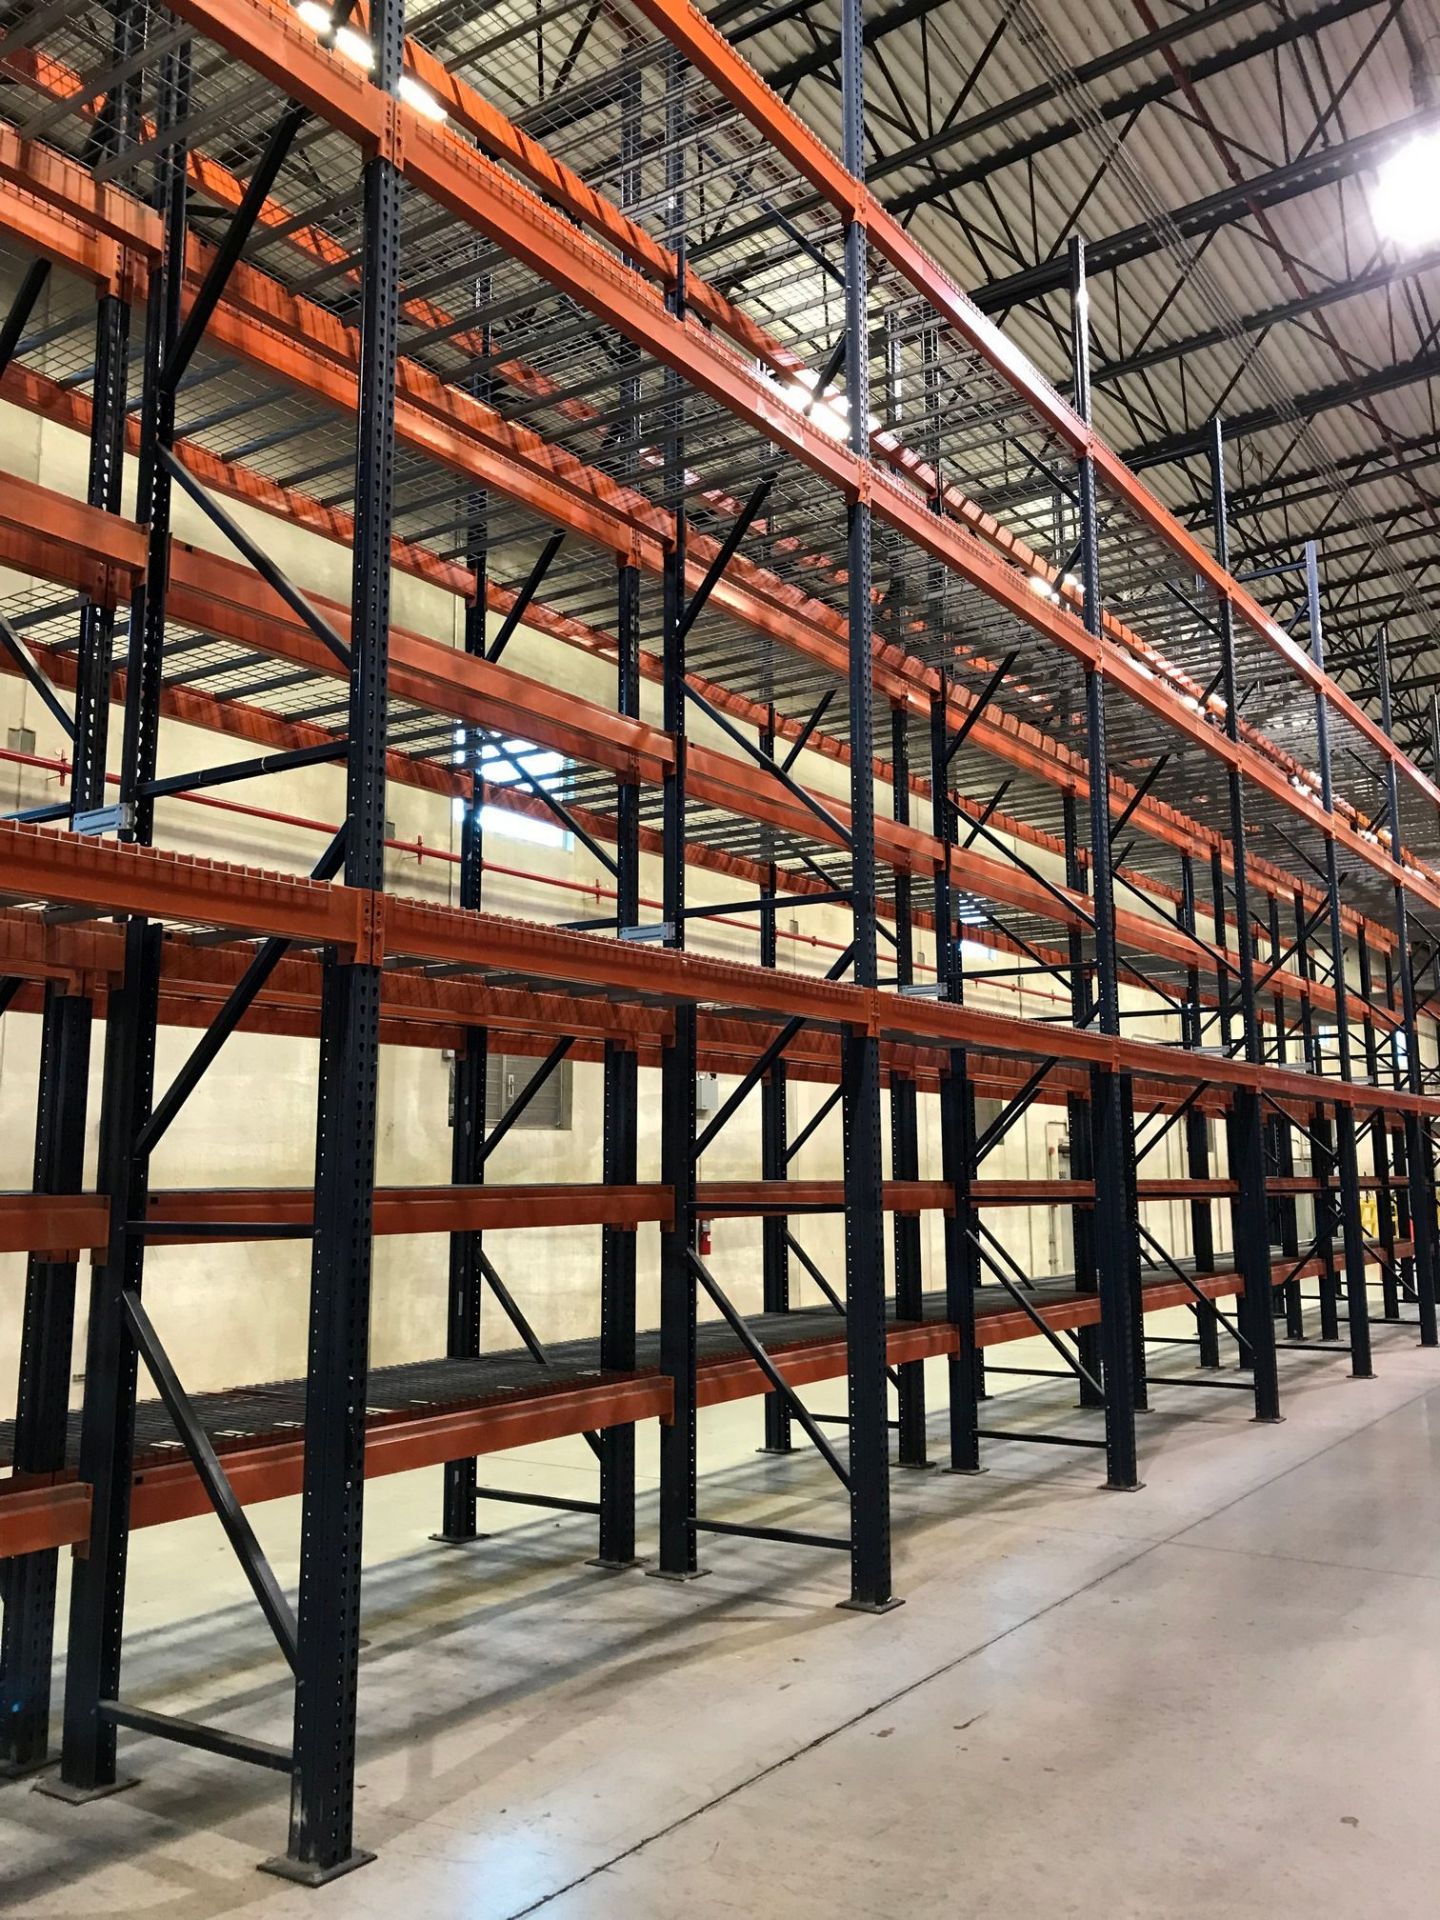 SECTIONS 60" X 108" X 288" TEARDROP TYPE ADJUSTABLE BEAM PALLET RACK WITH WIRE DECKING, 6" HIGH - Image 4 of 16